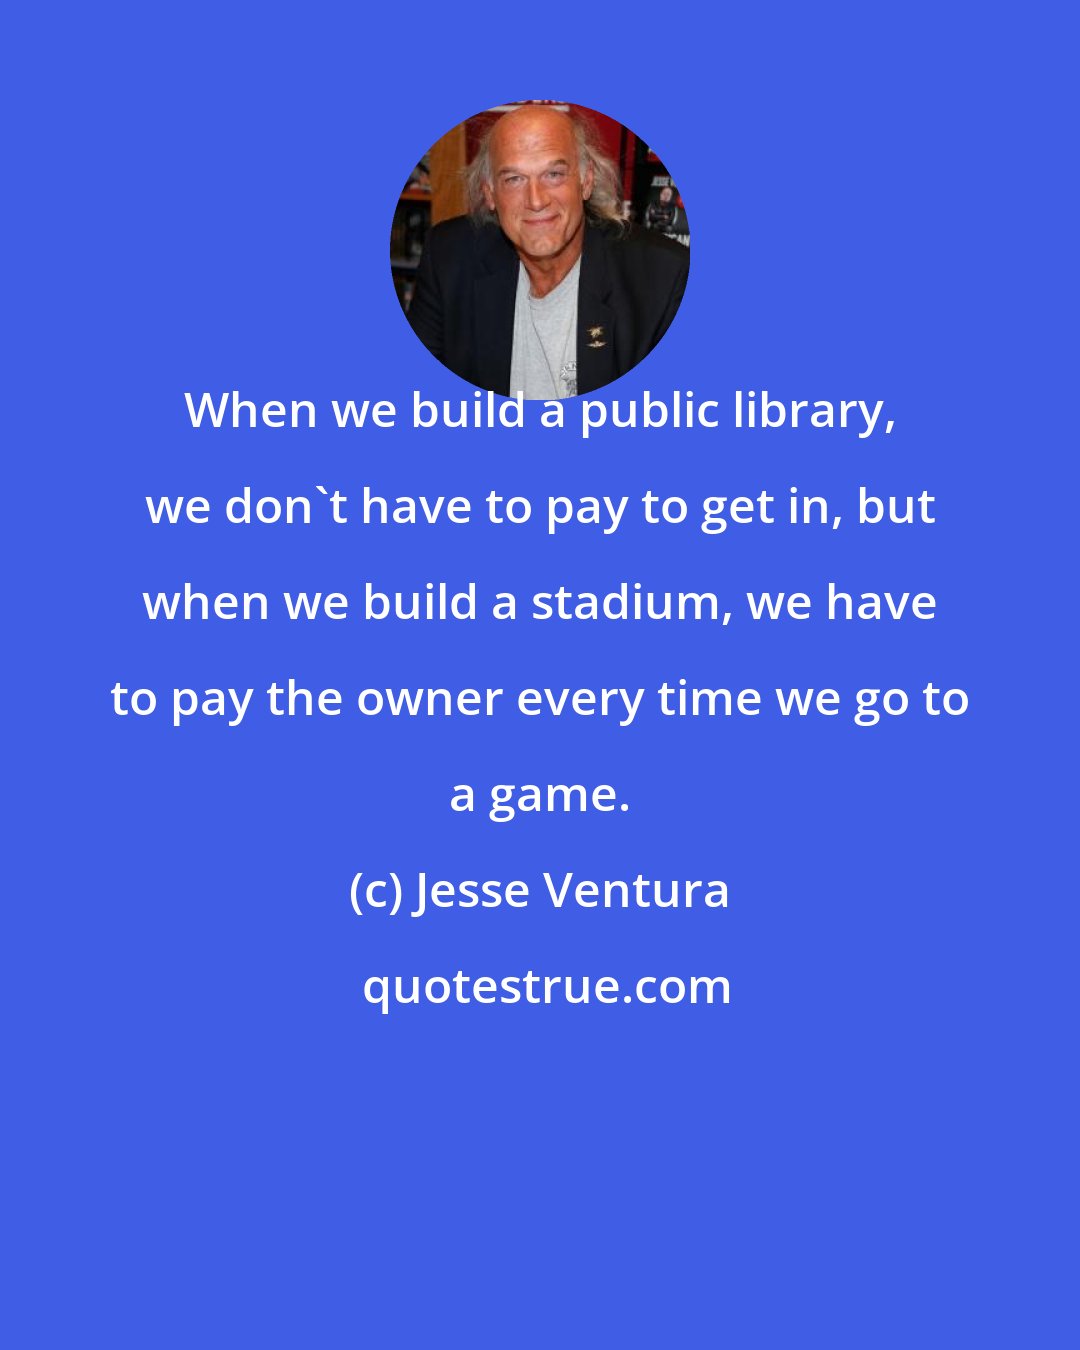 Jesse Ventura: When we build a public library, we don't have to pay to get in, but when we build a stadium, we have to pay the owner every time we go to a game.